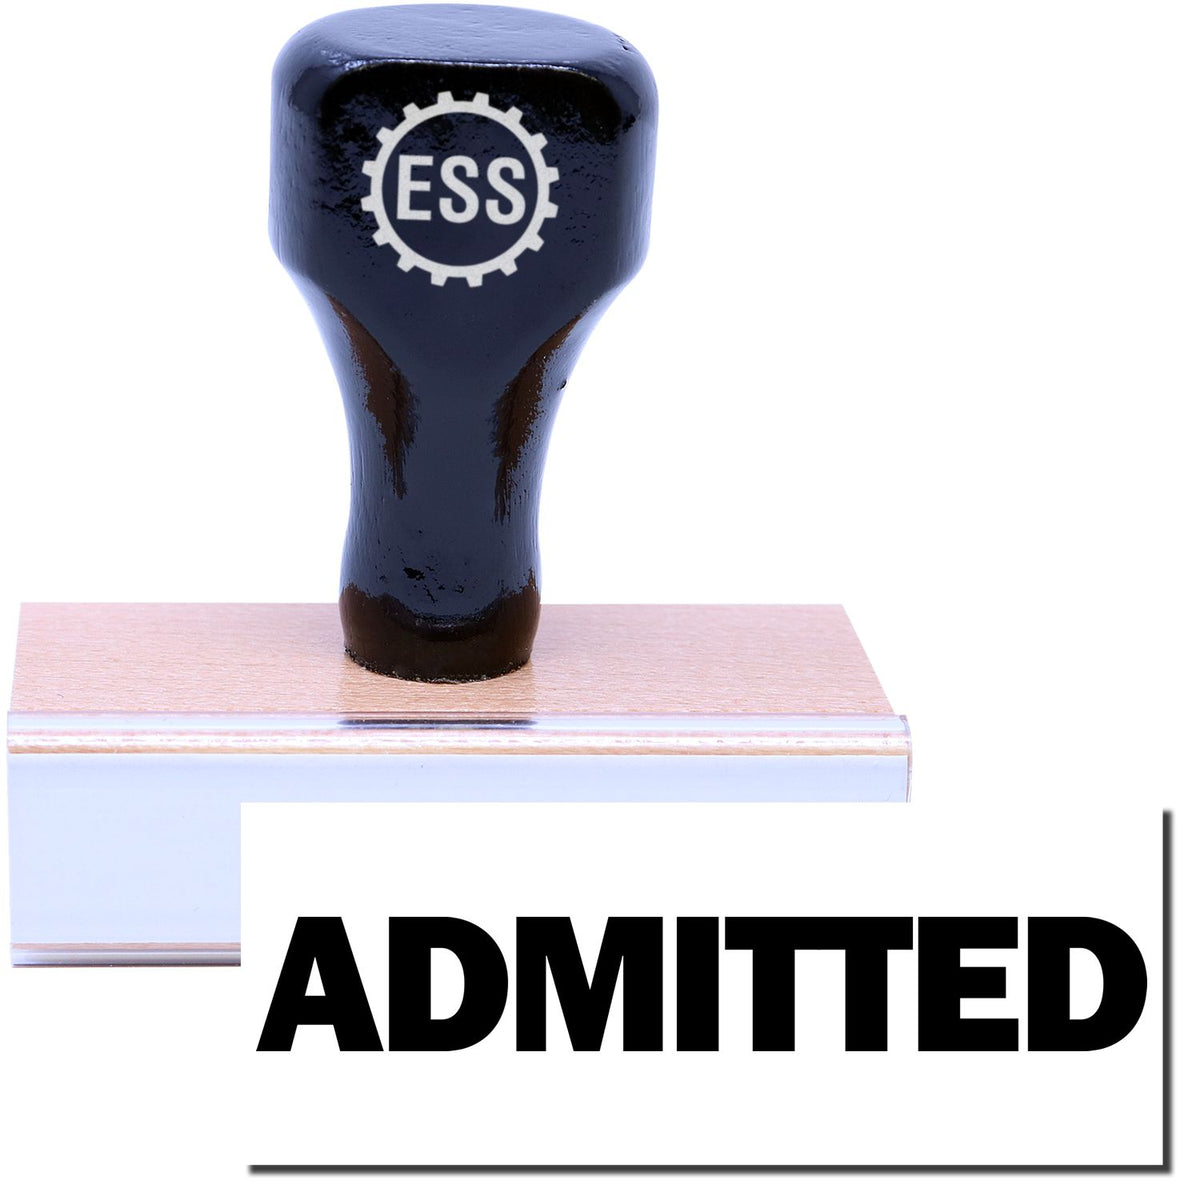 A stock office rubber stamp with a stamped image showing how the text &quot;ADMITTED&quot; in bold font is displayed after stamping.